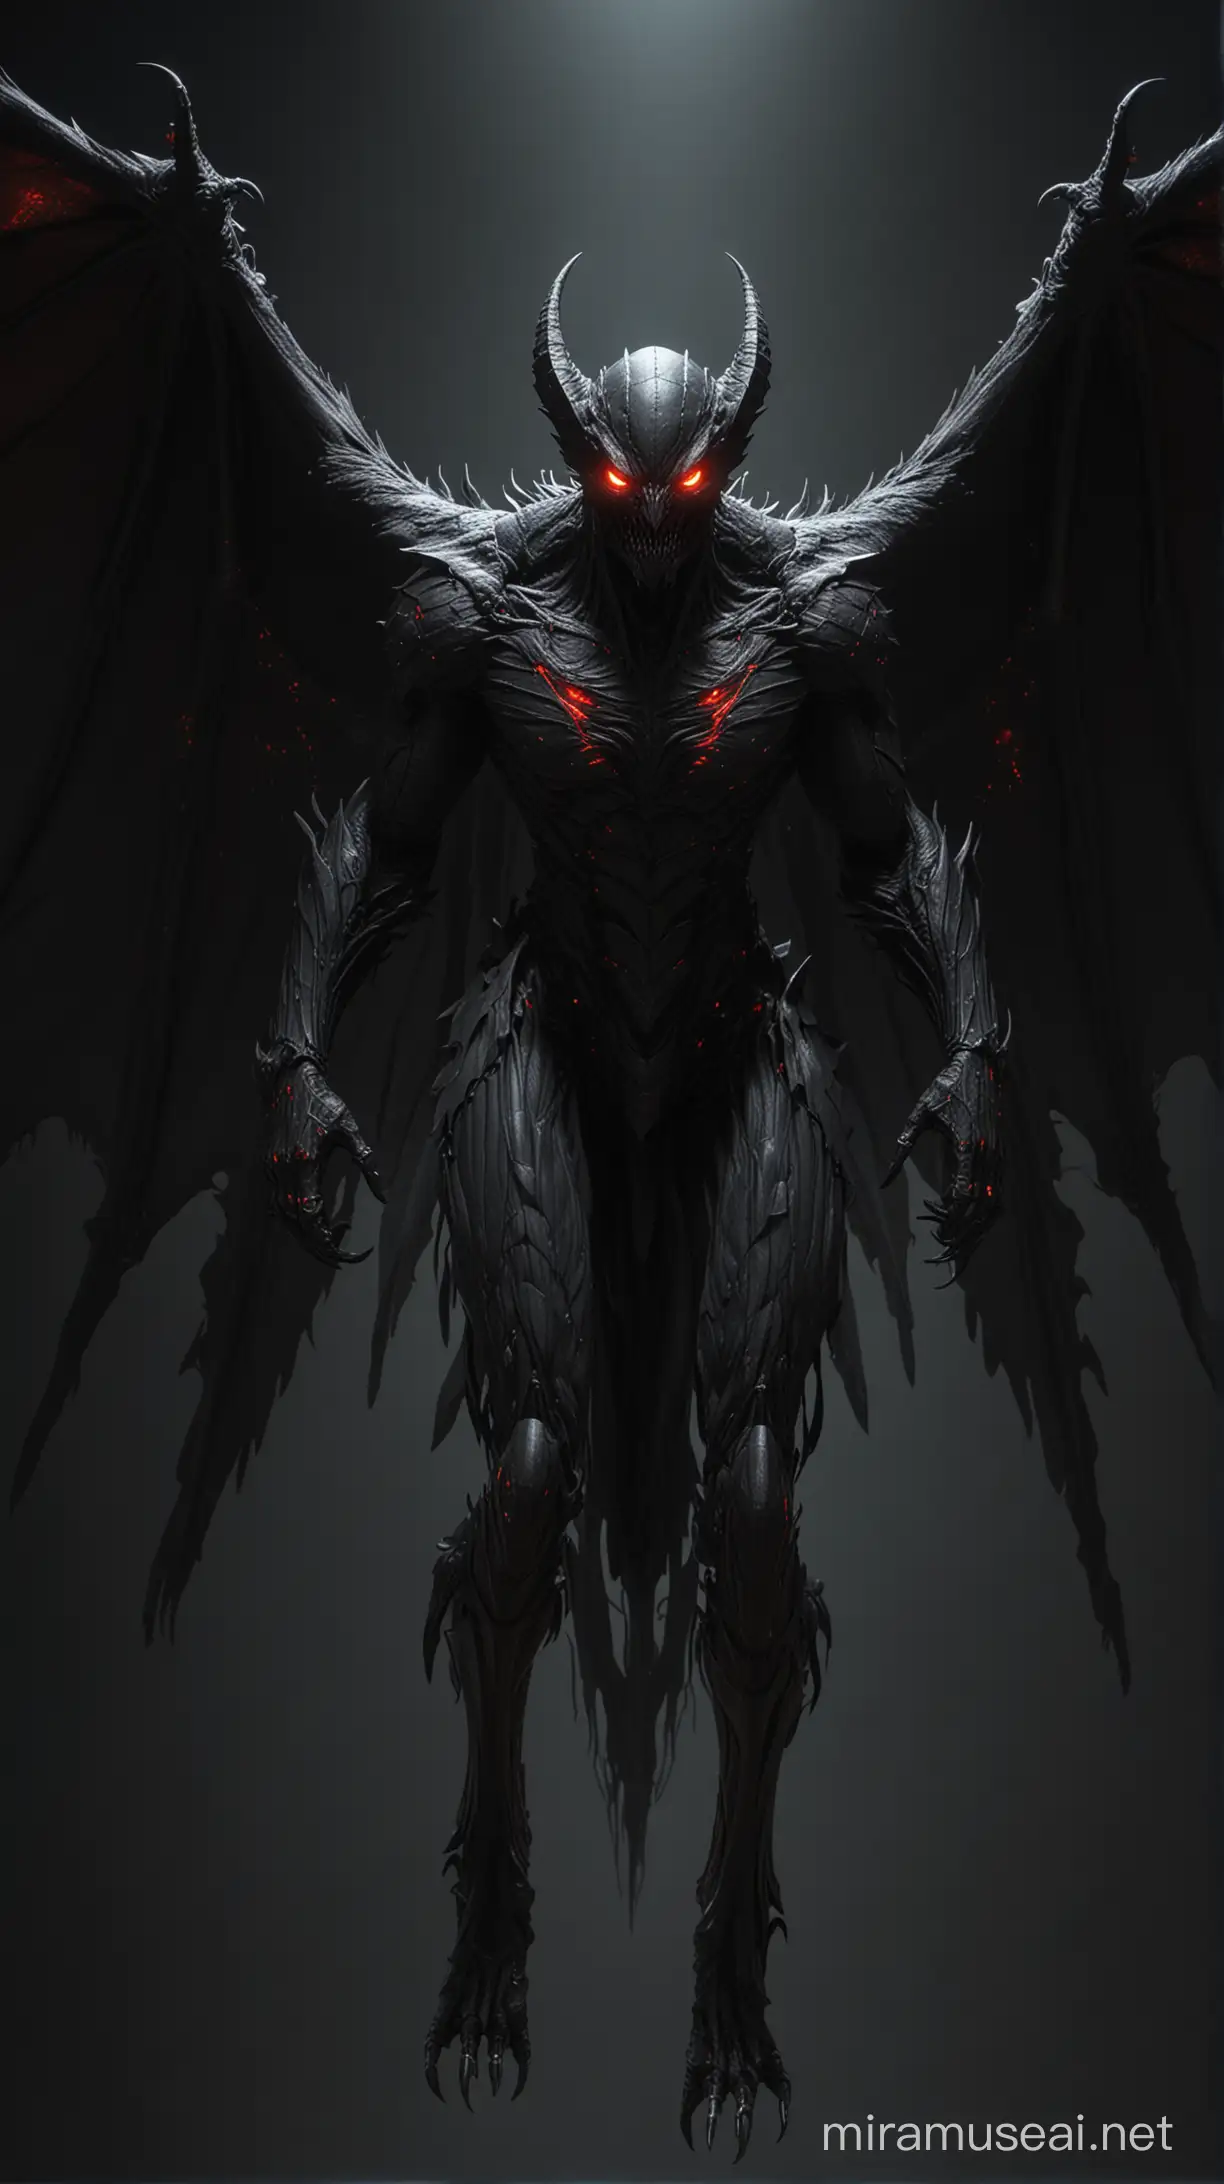 A monstrous humanoid creature with bat-like wings and insectoid features, its black wings stretched wide, red eyes glowing ominously in the dark, detailed and realistic, high resolution artwork.